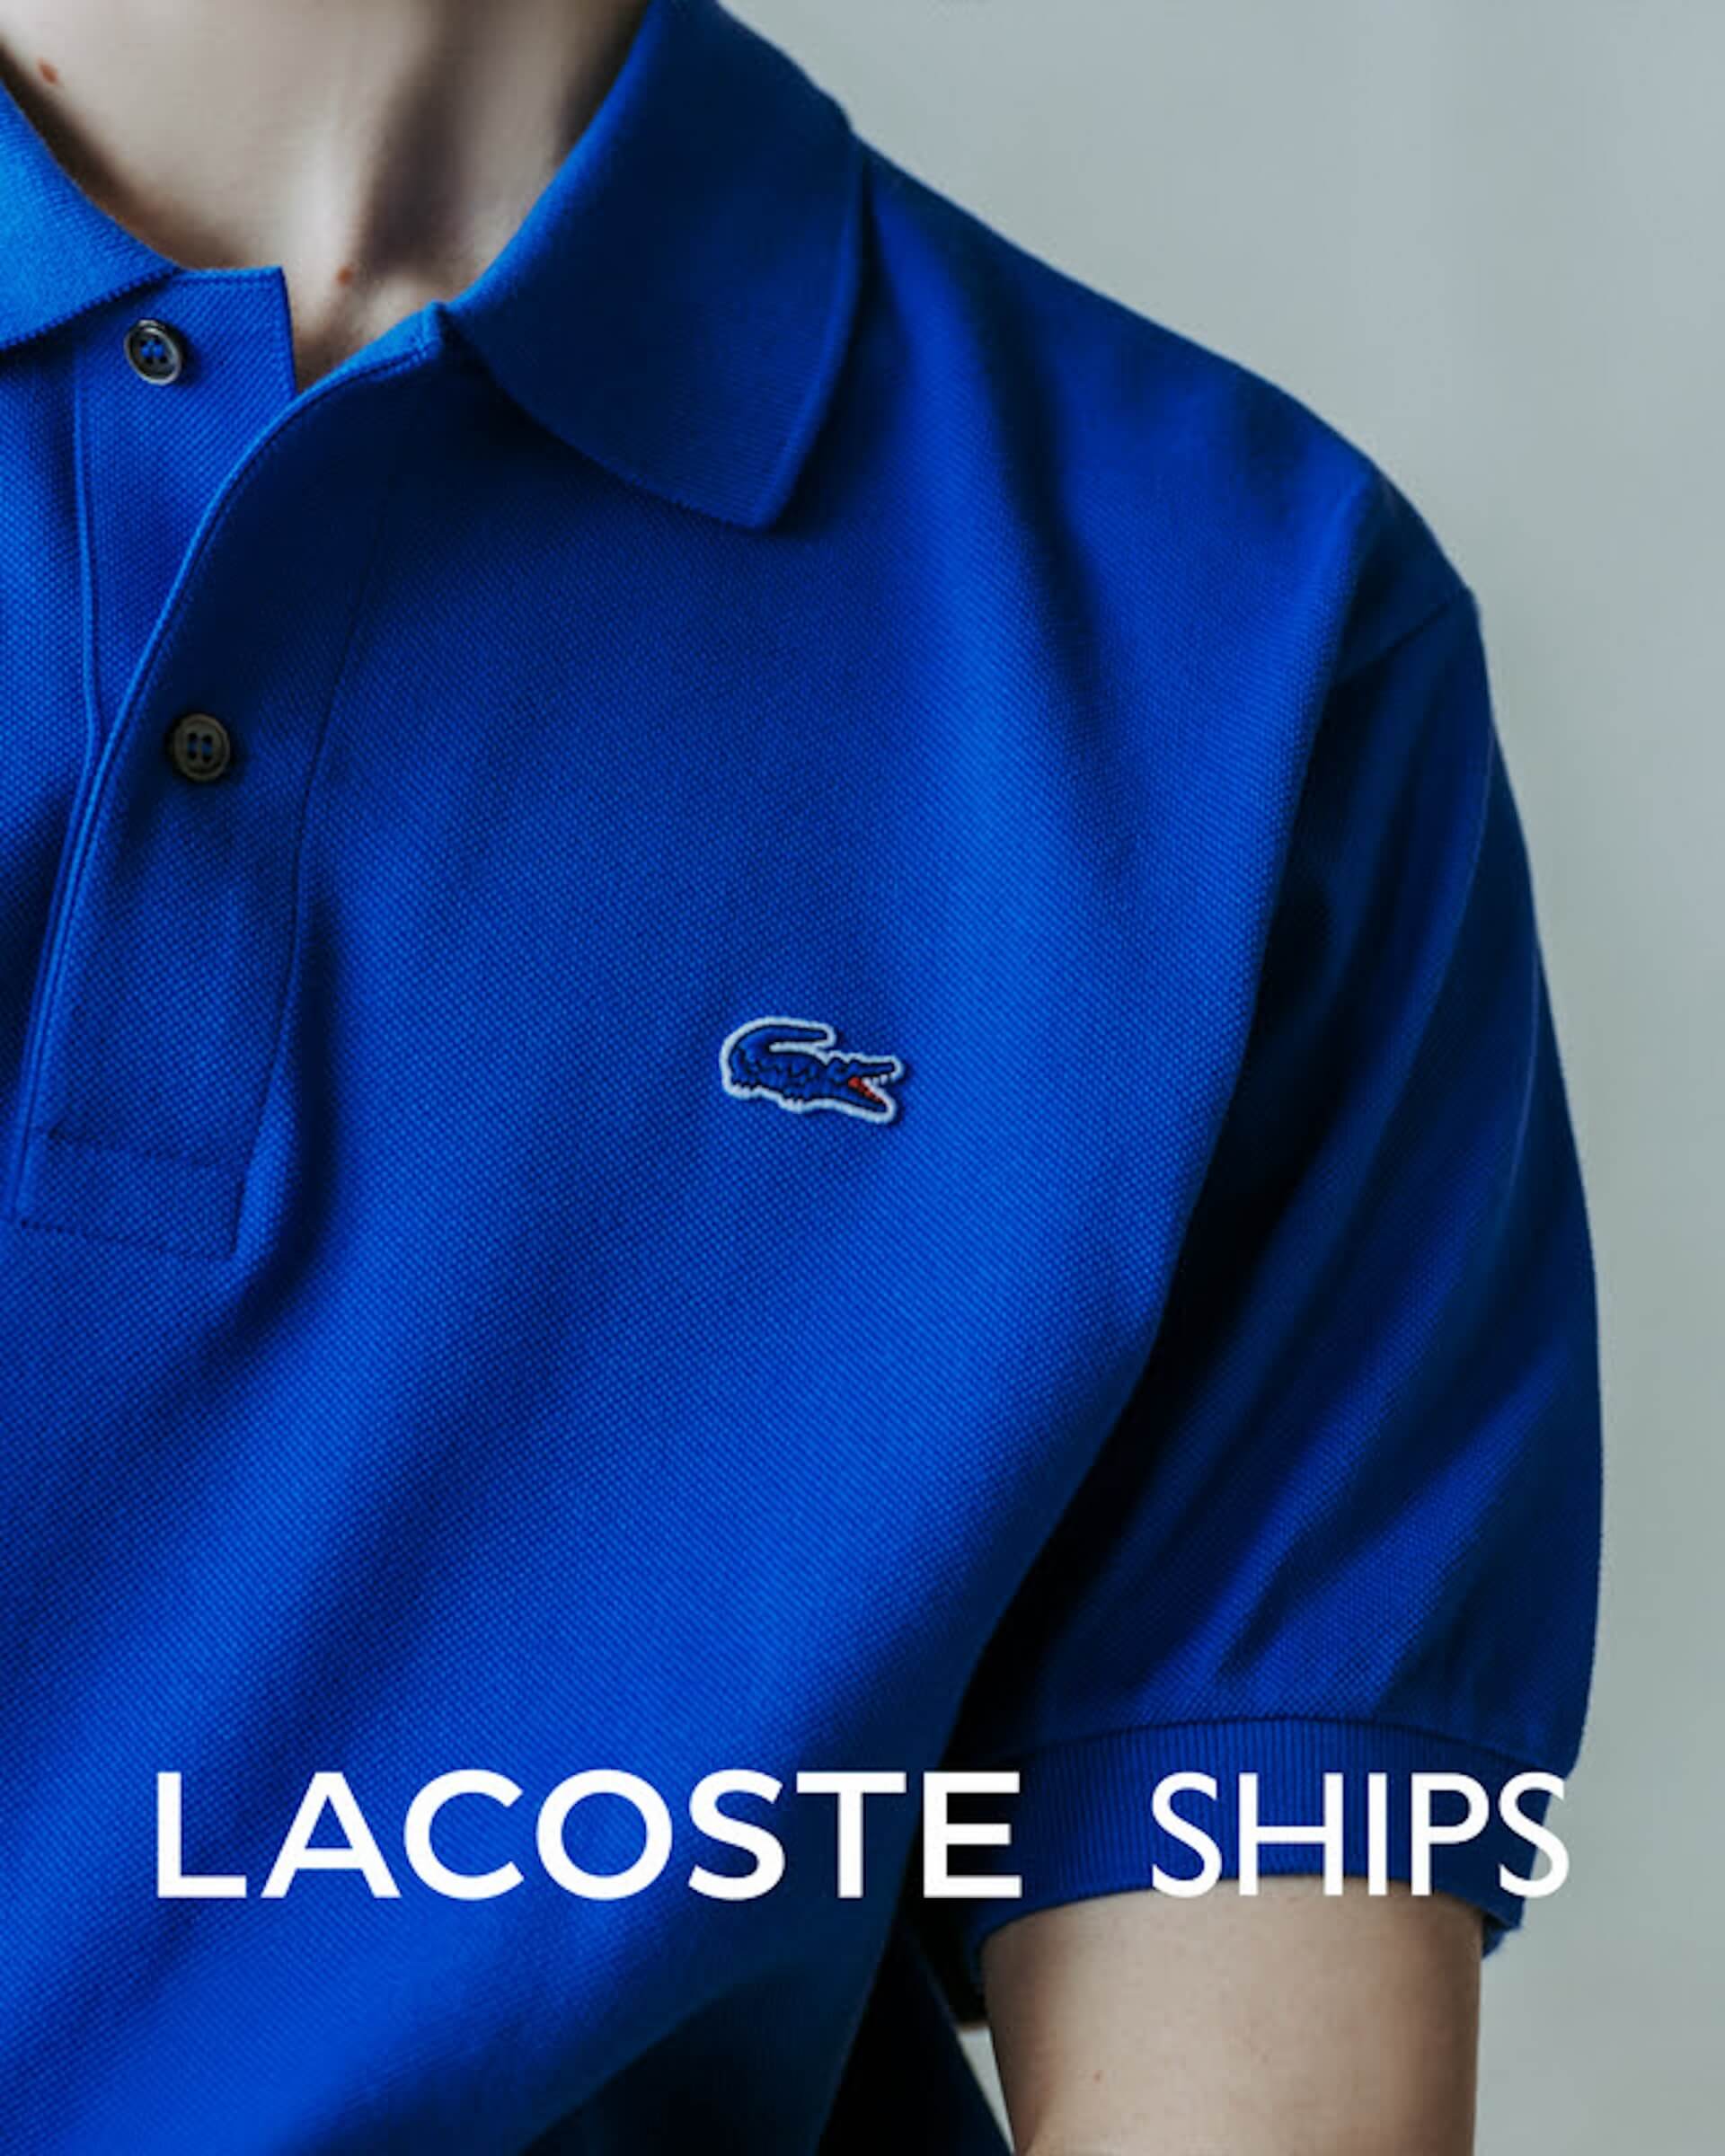 LACOSTE × SHIPS